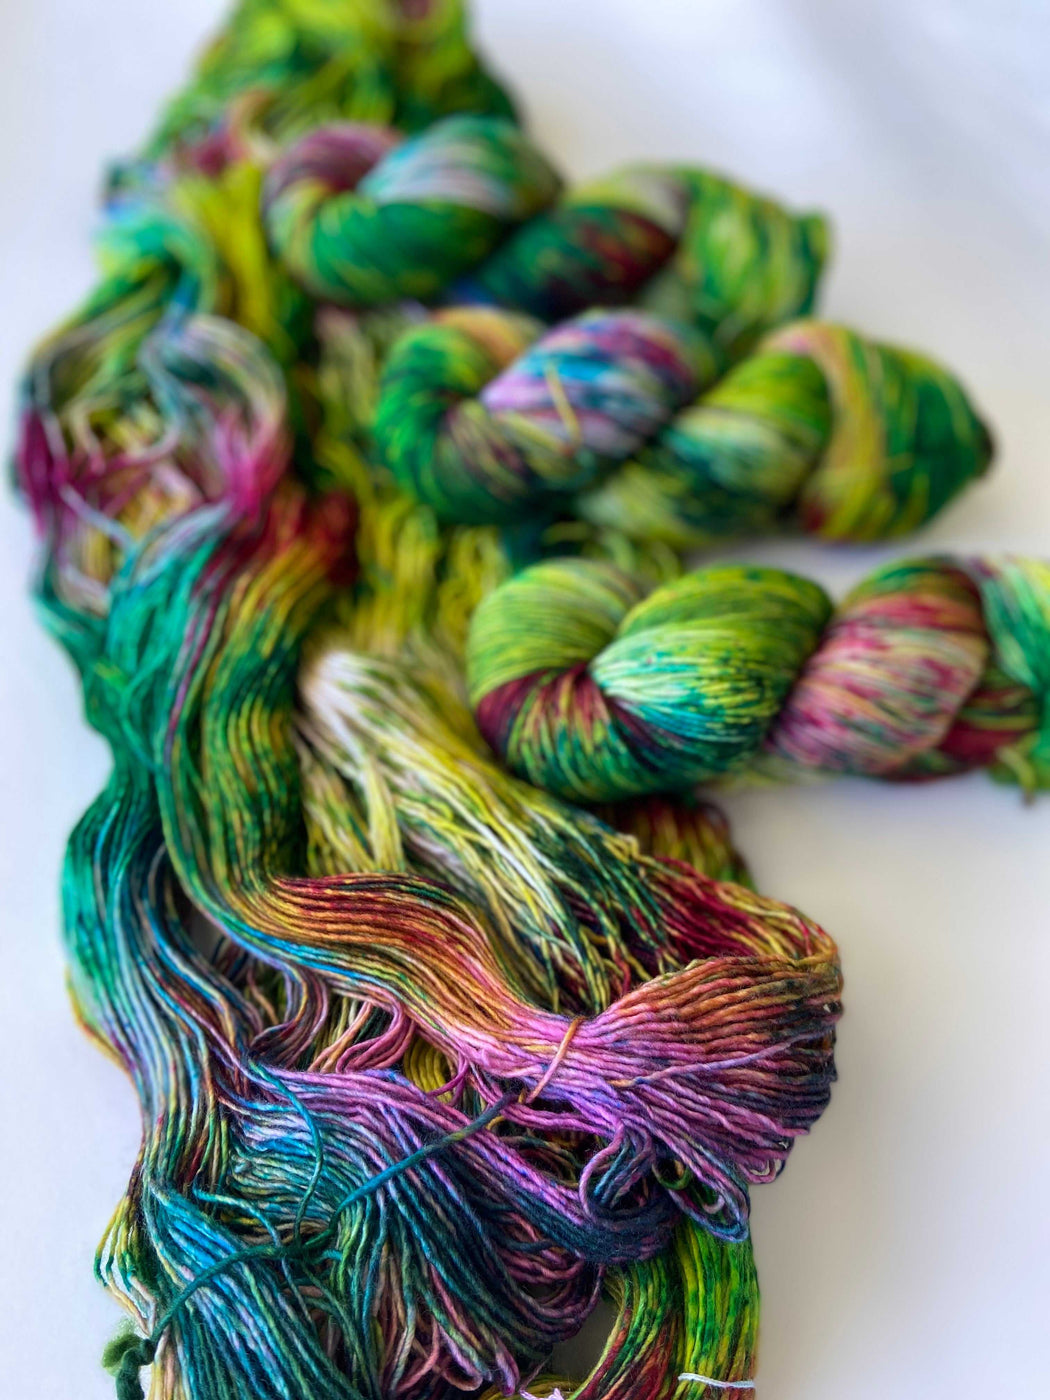 Unbreakable Vow - Ruby and Roses Yarn - Hand Dyed Yarn